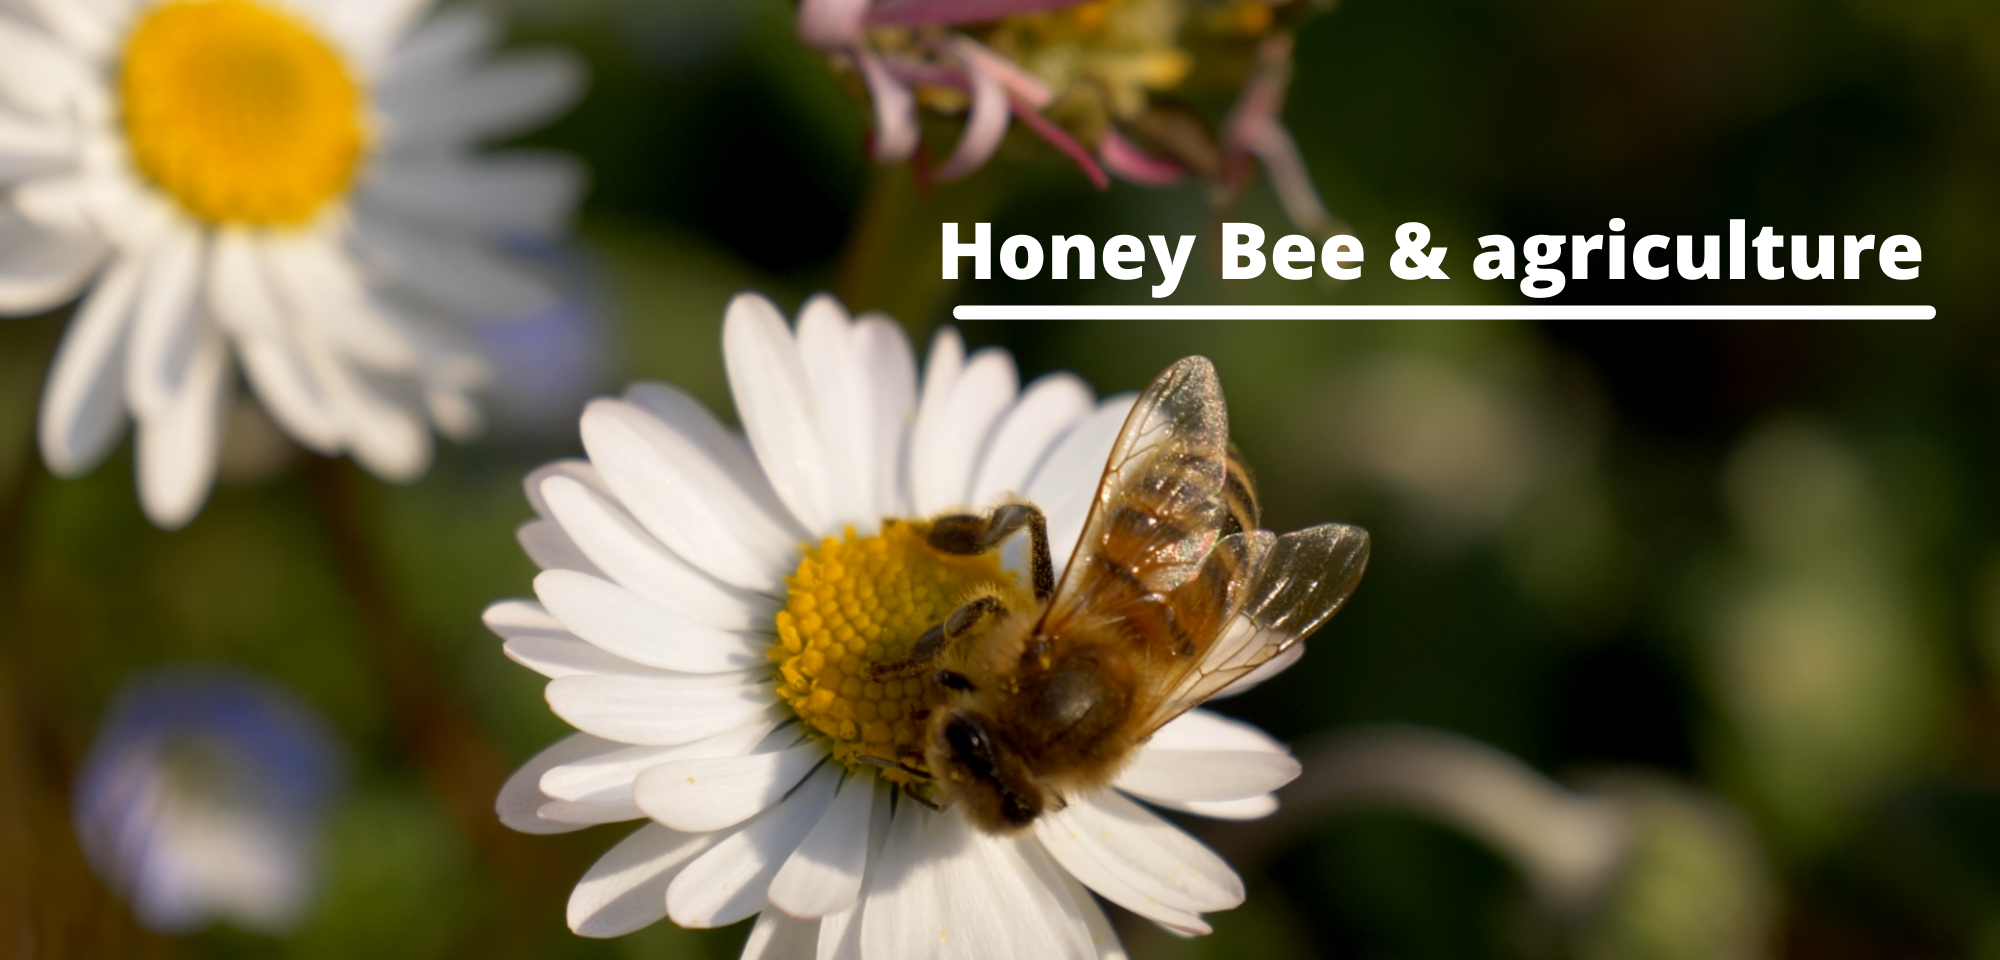 Effect of Honey bees on agriculture and food production – Let'sLive